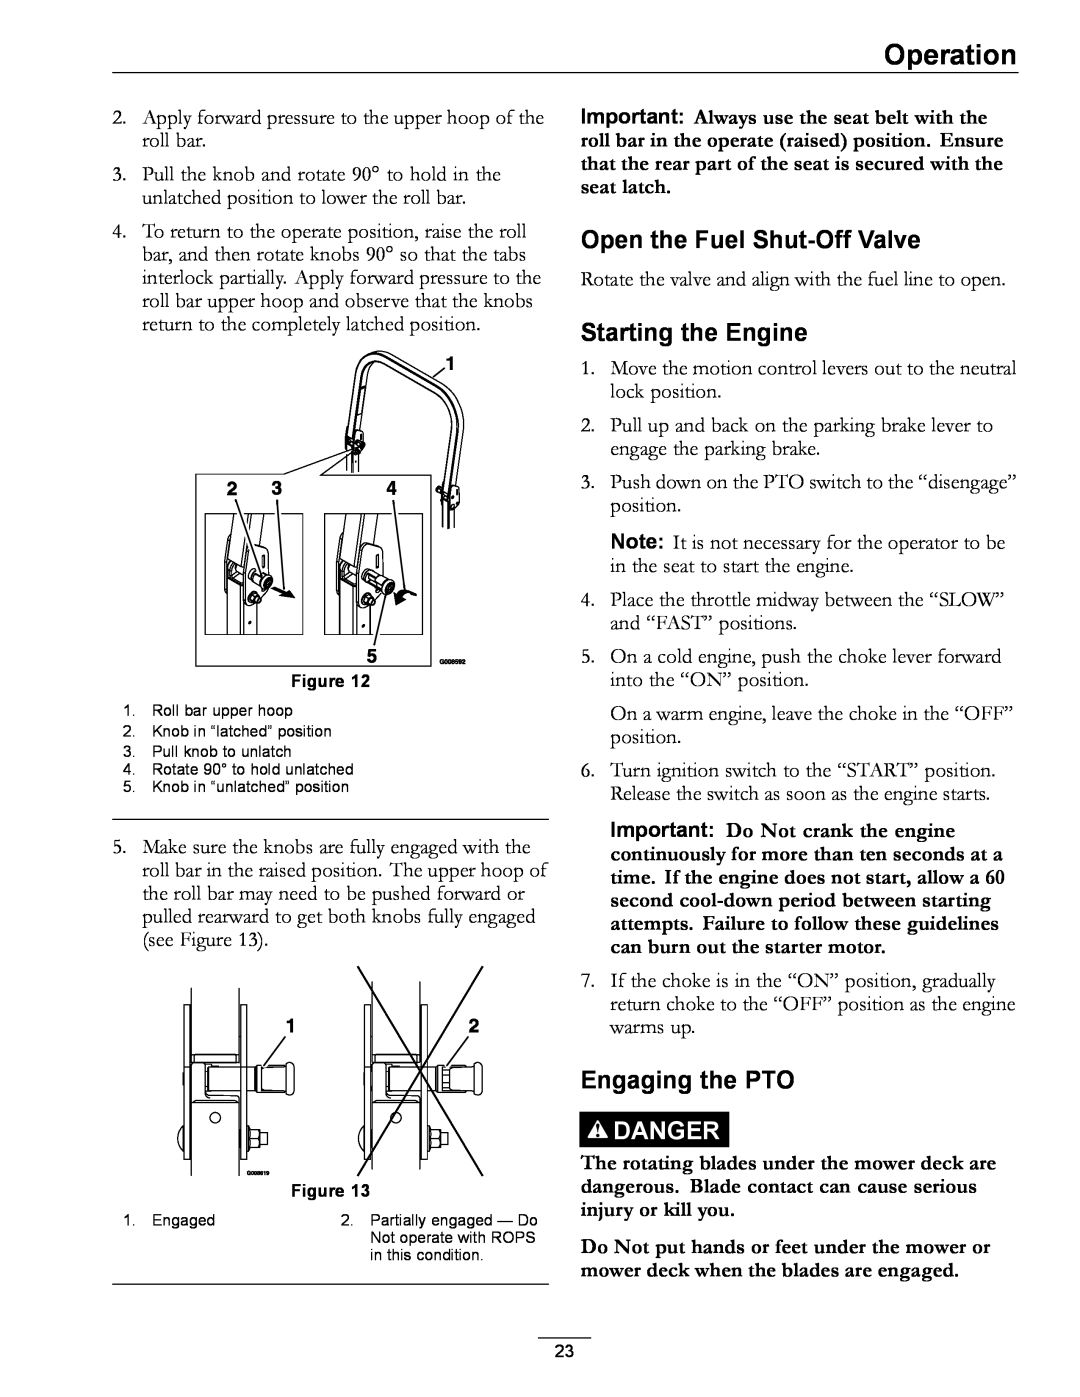 Exmark 4500-872 manual Open the Fuel Shut-Off Valve, Starting the Engine, Engaging the PTO, Operation, Danger 